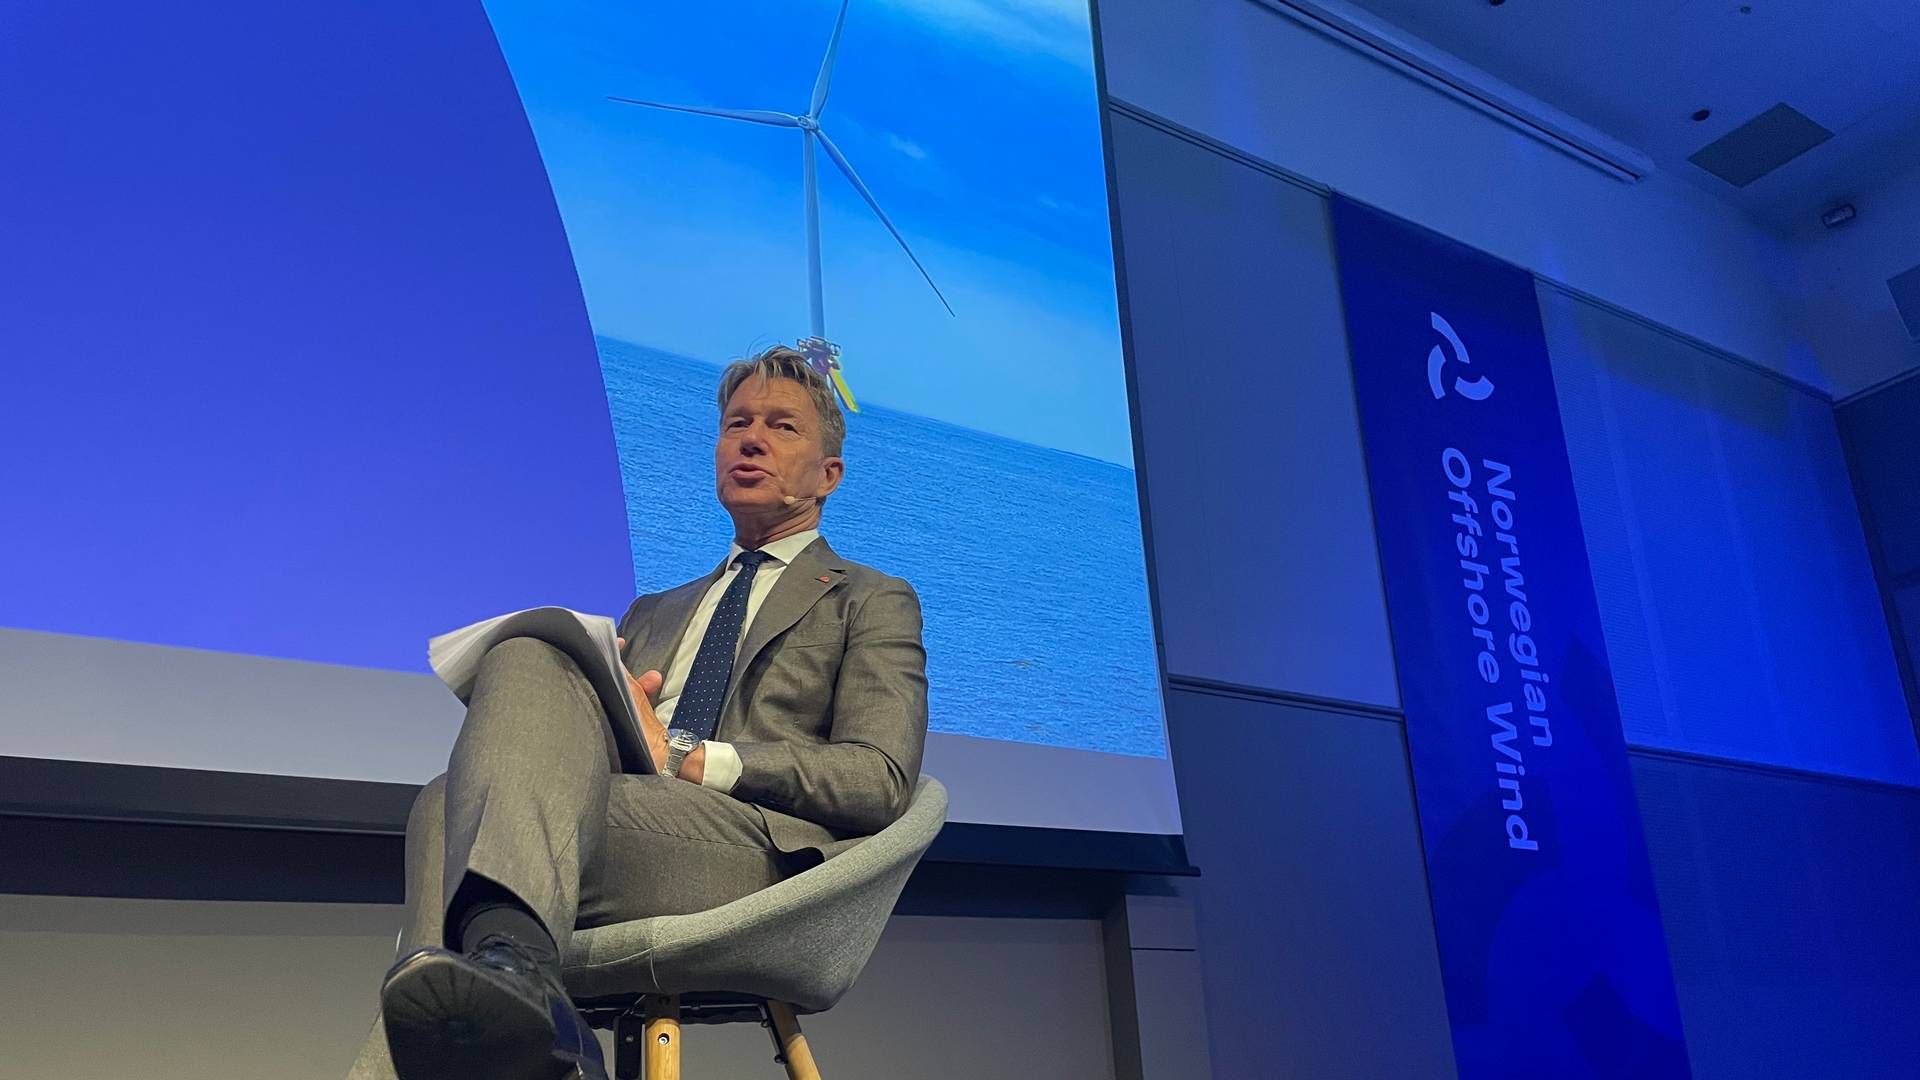 AHEAD OF AUCTION: "I believe in Norwegian expertise, so I'm still optimistic," says Terje Aasland about the bidding for Southern North Sea II. Here he is on stage during an offshore wind conference in downtown Oslo on Tuesday. | Photo: Harald Amdal